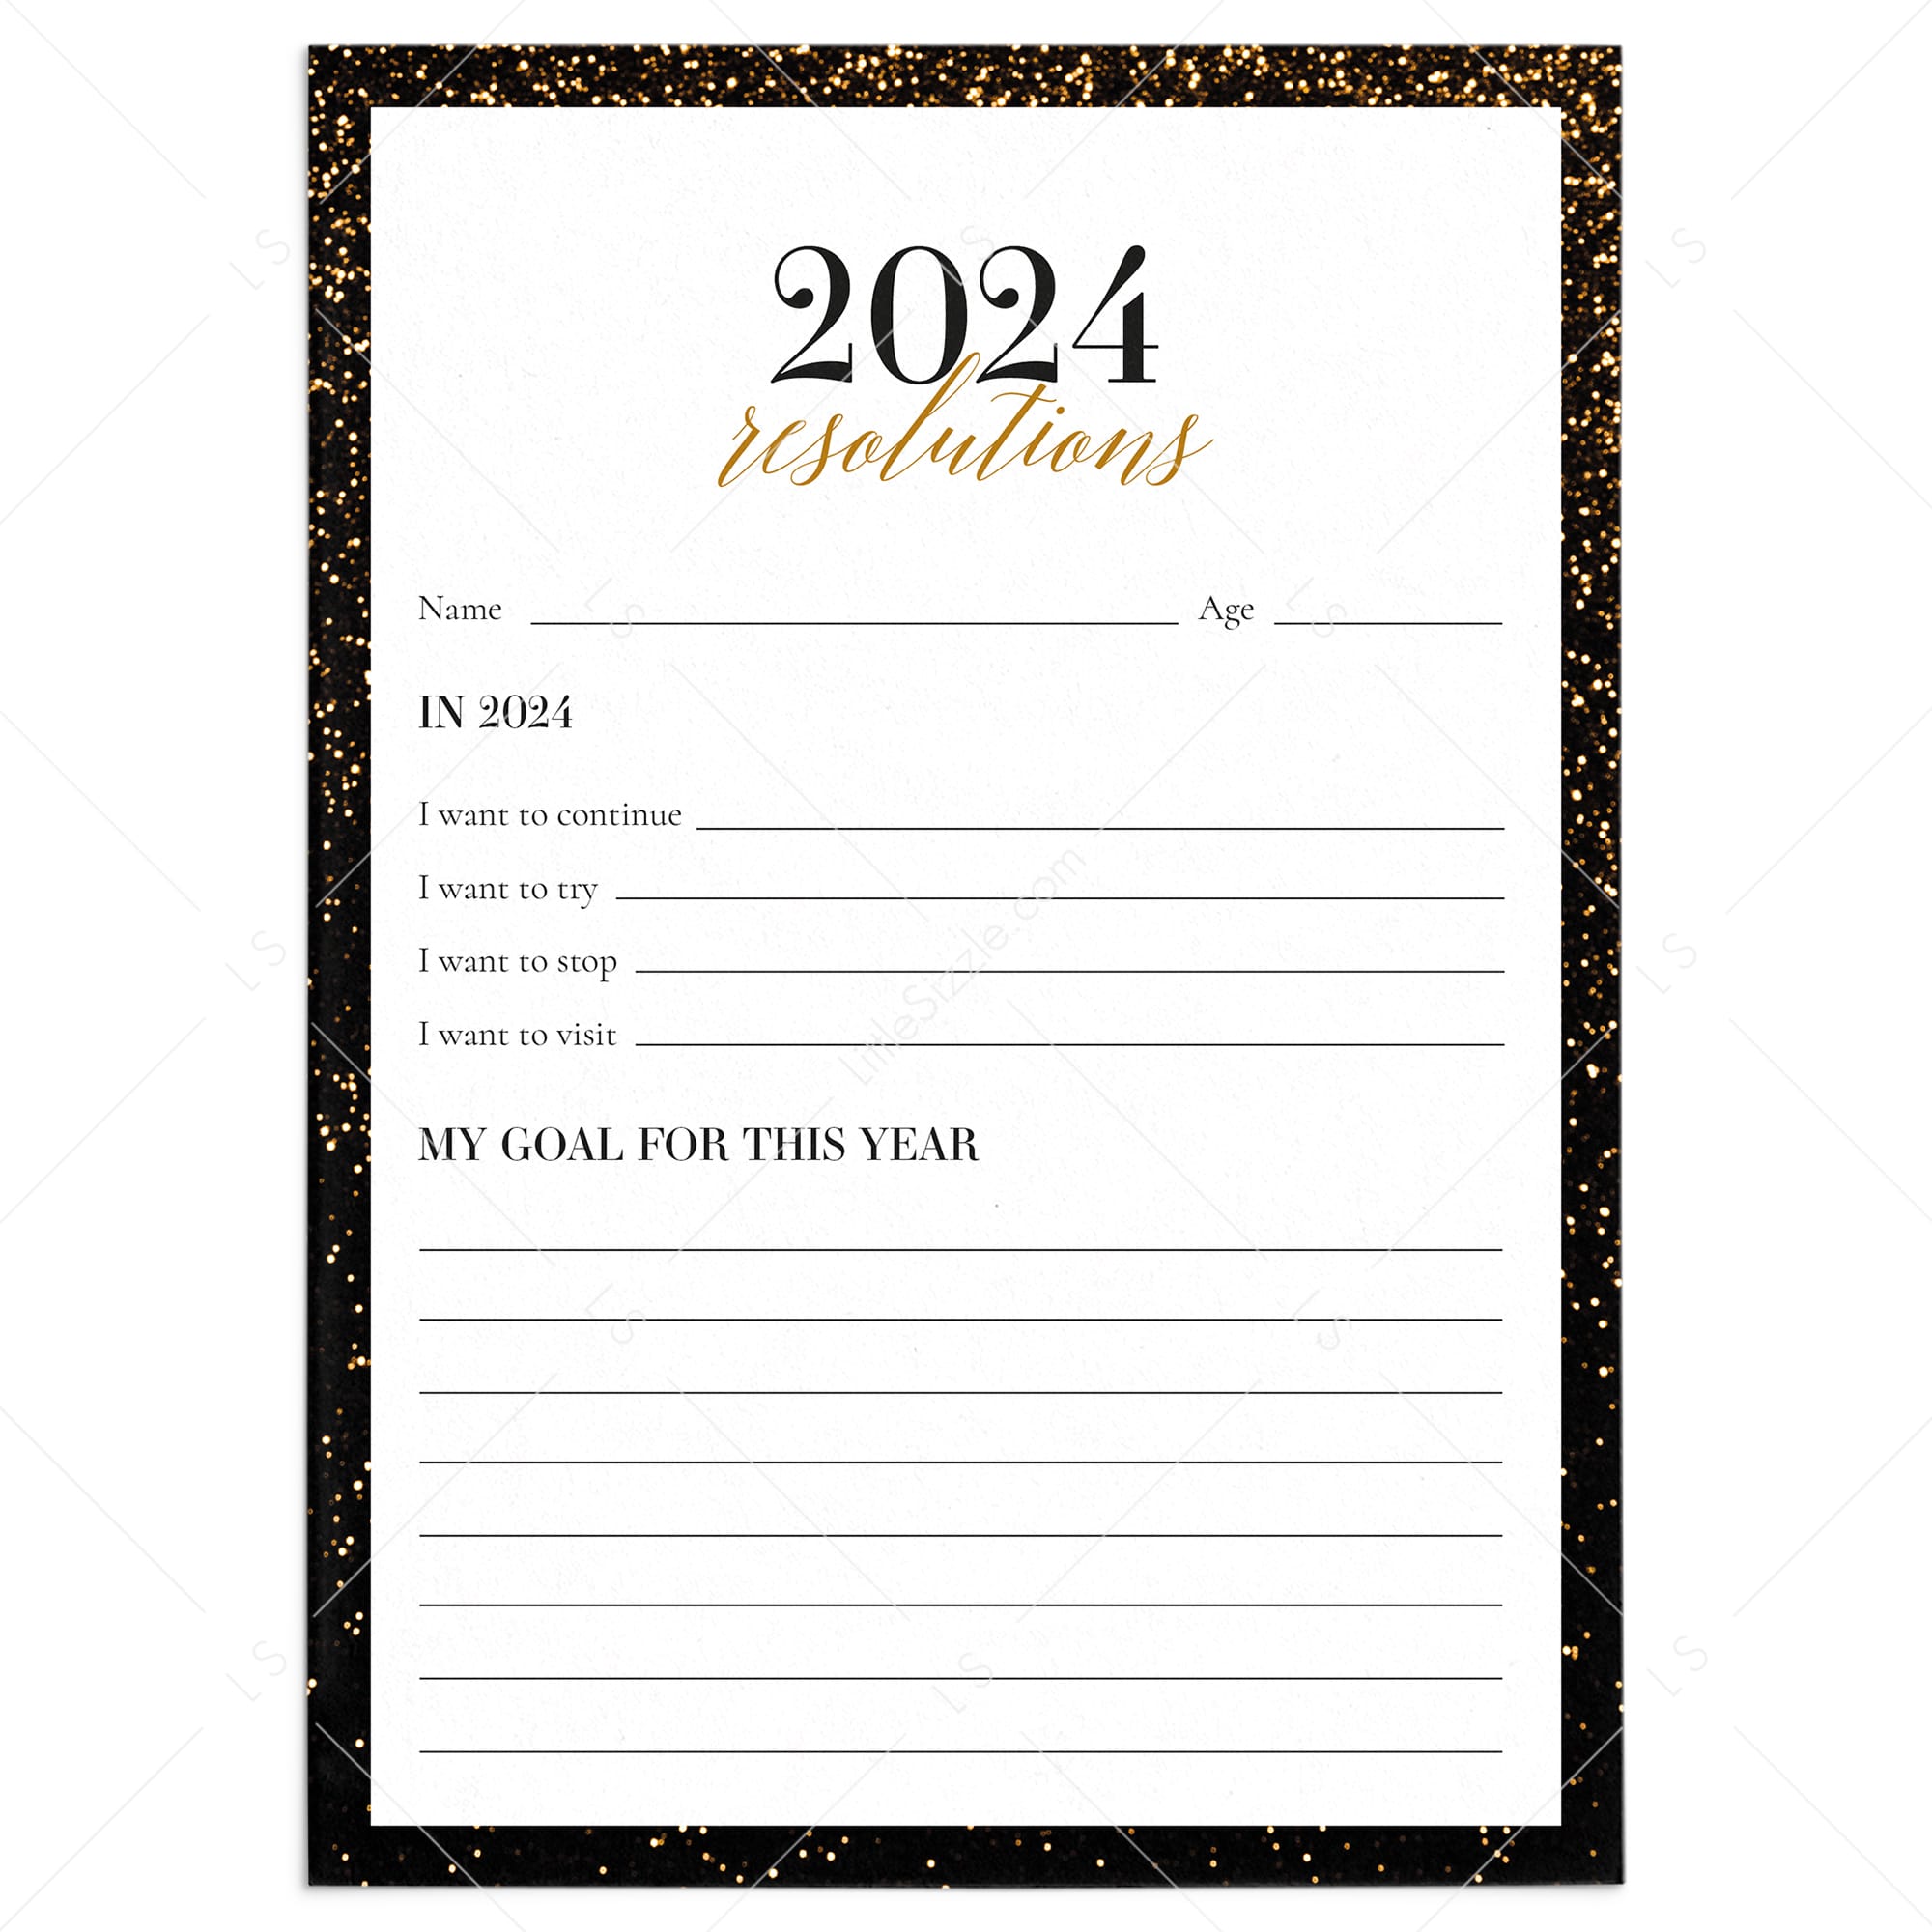 2024 Resolutions and New Year's Goals Card Printable by LittleSizzle